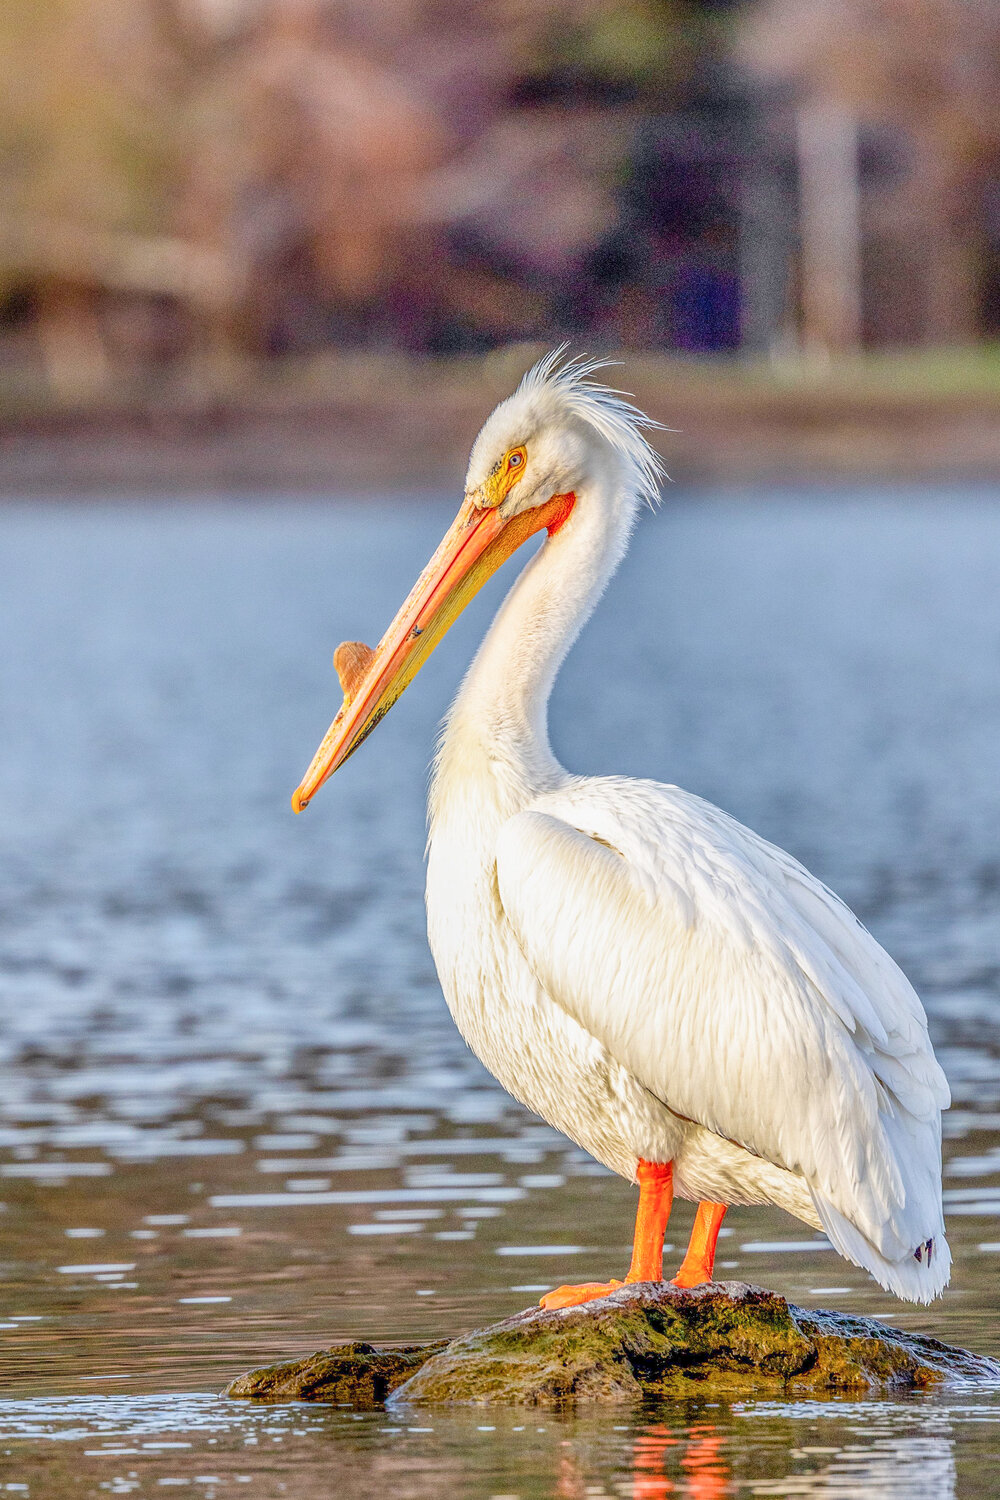 American White Pelicans have been spotted on Lake Granbury. The BRA states these sightings “could be due to a fish kill” caused by Golden Algae.